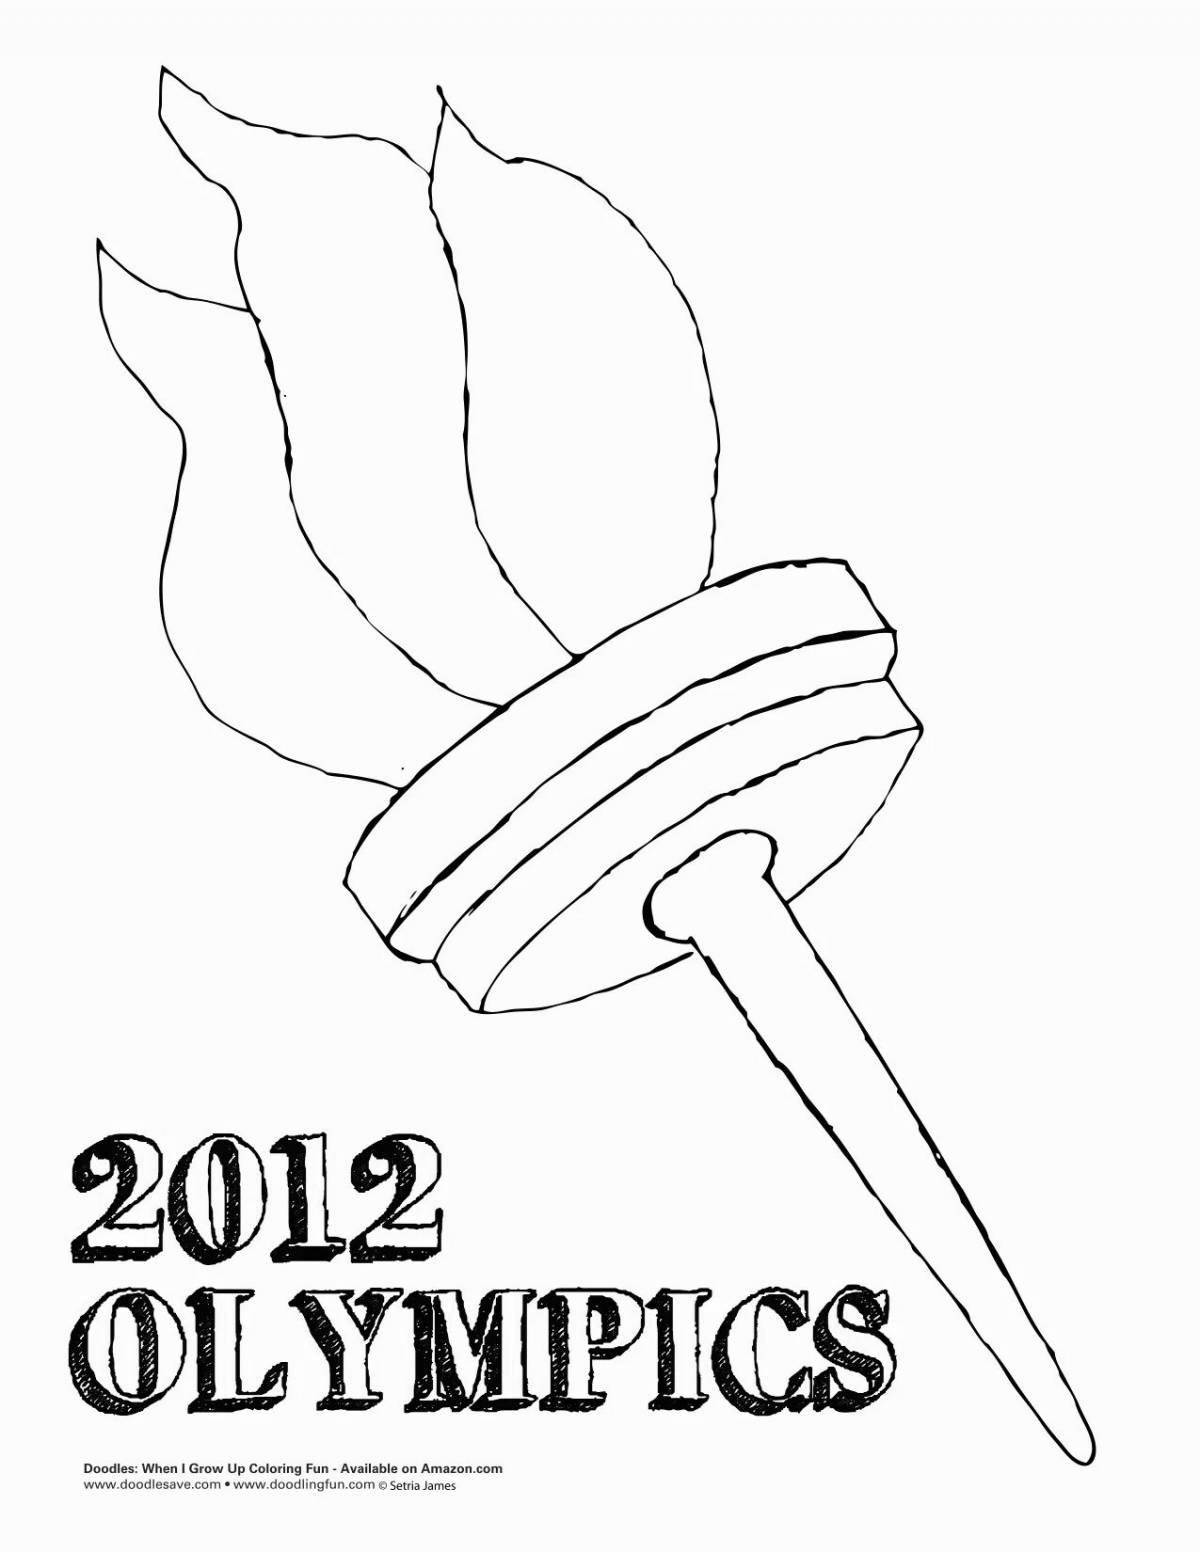 Olympic torch coloring page in bright colors